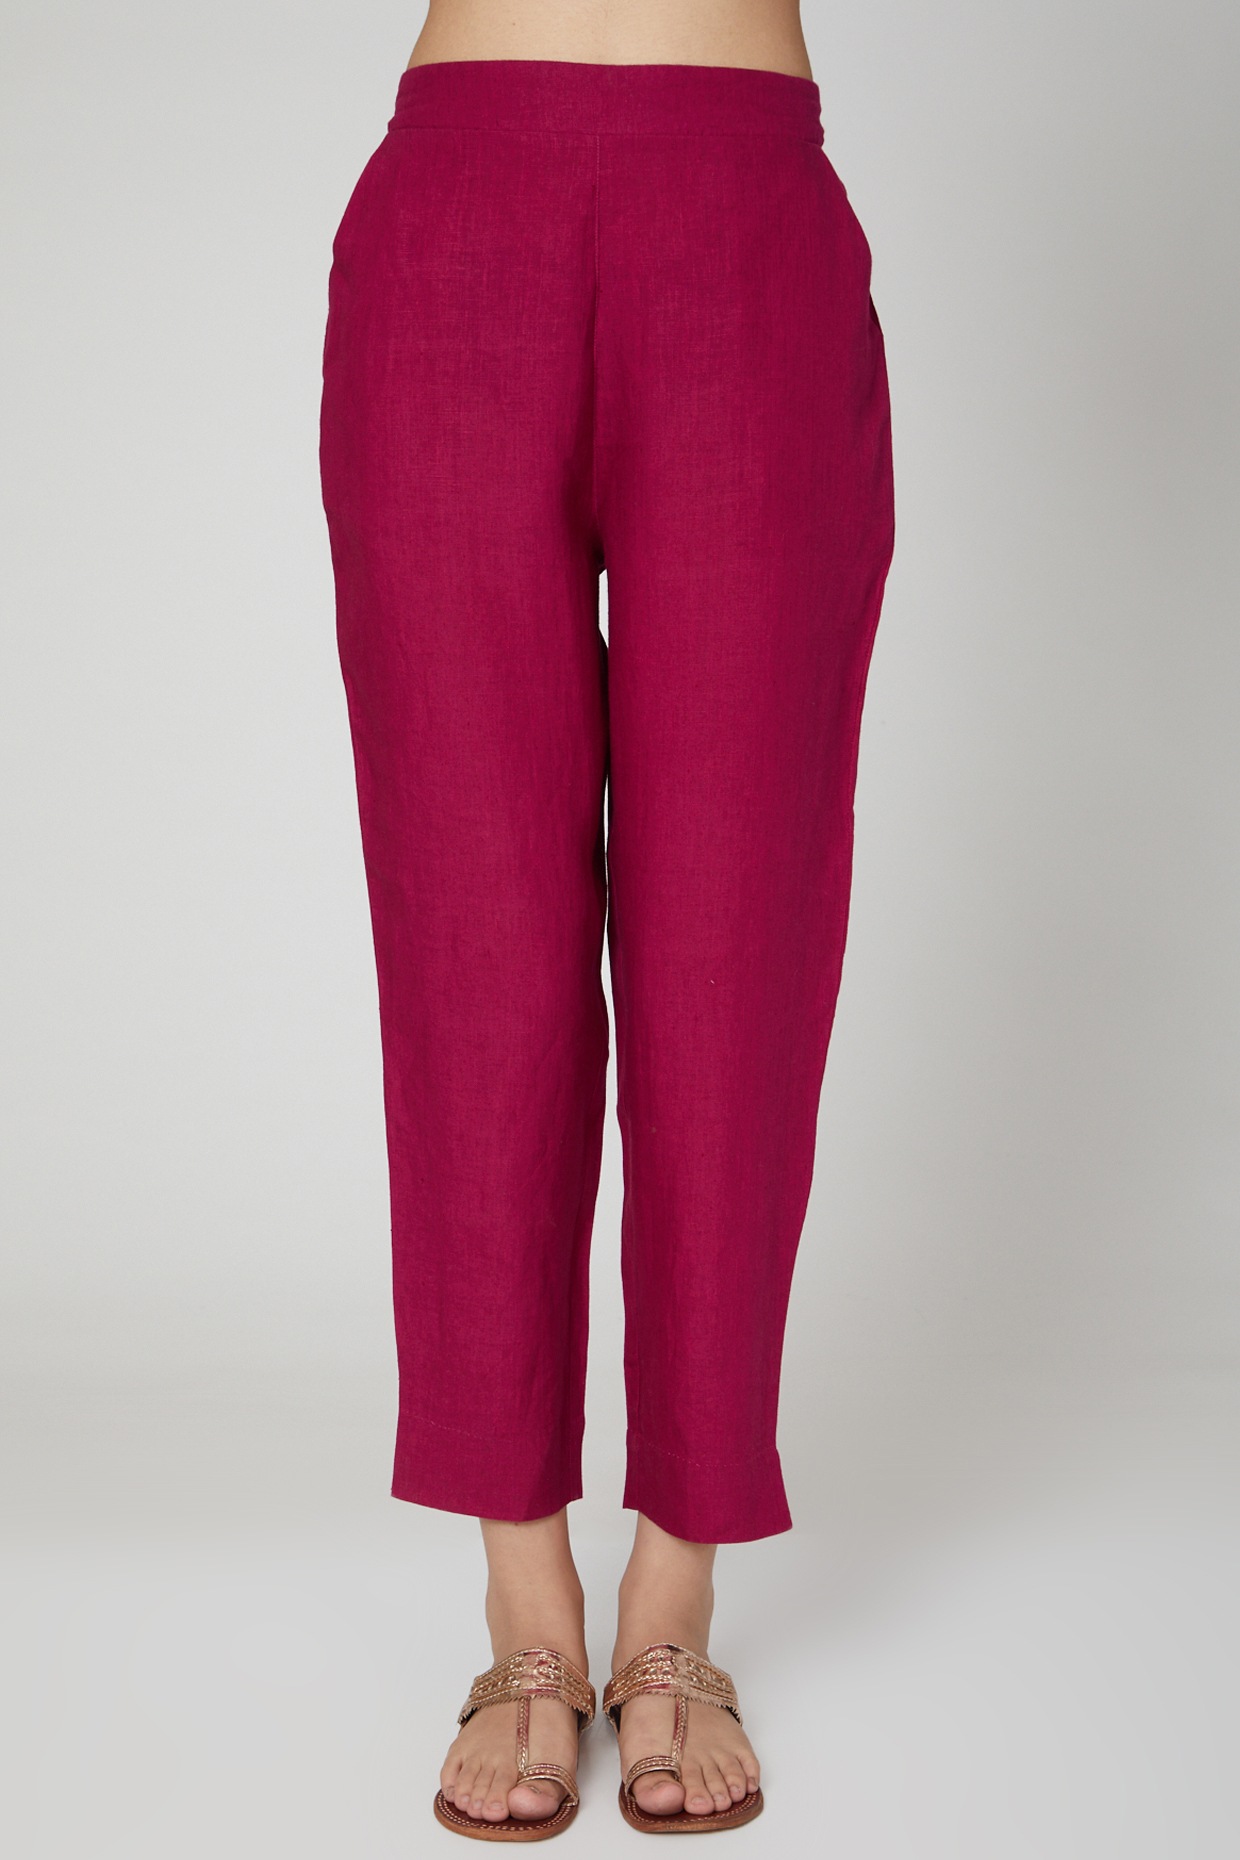 Buy Pencil Cut Pants for Women Online from India's Luxury